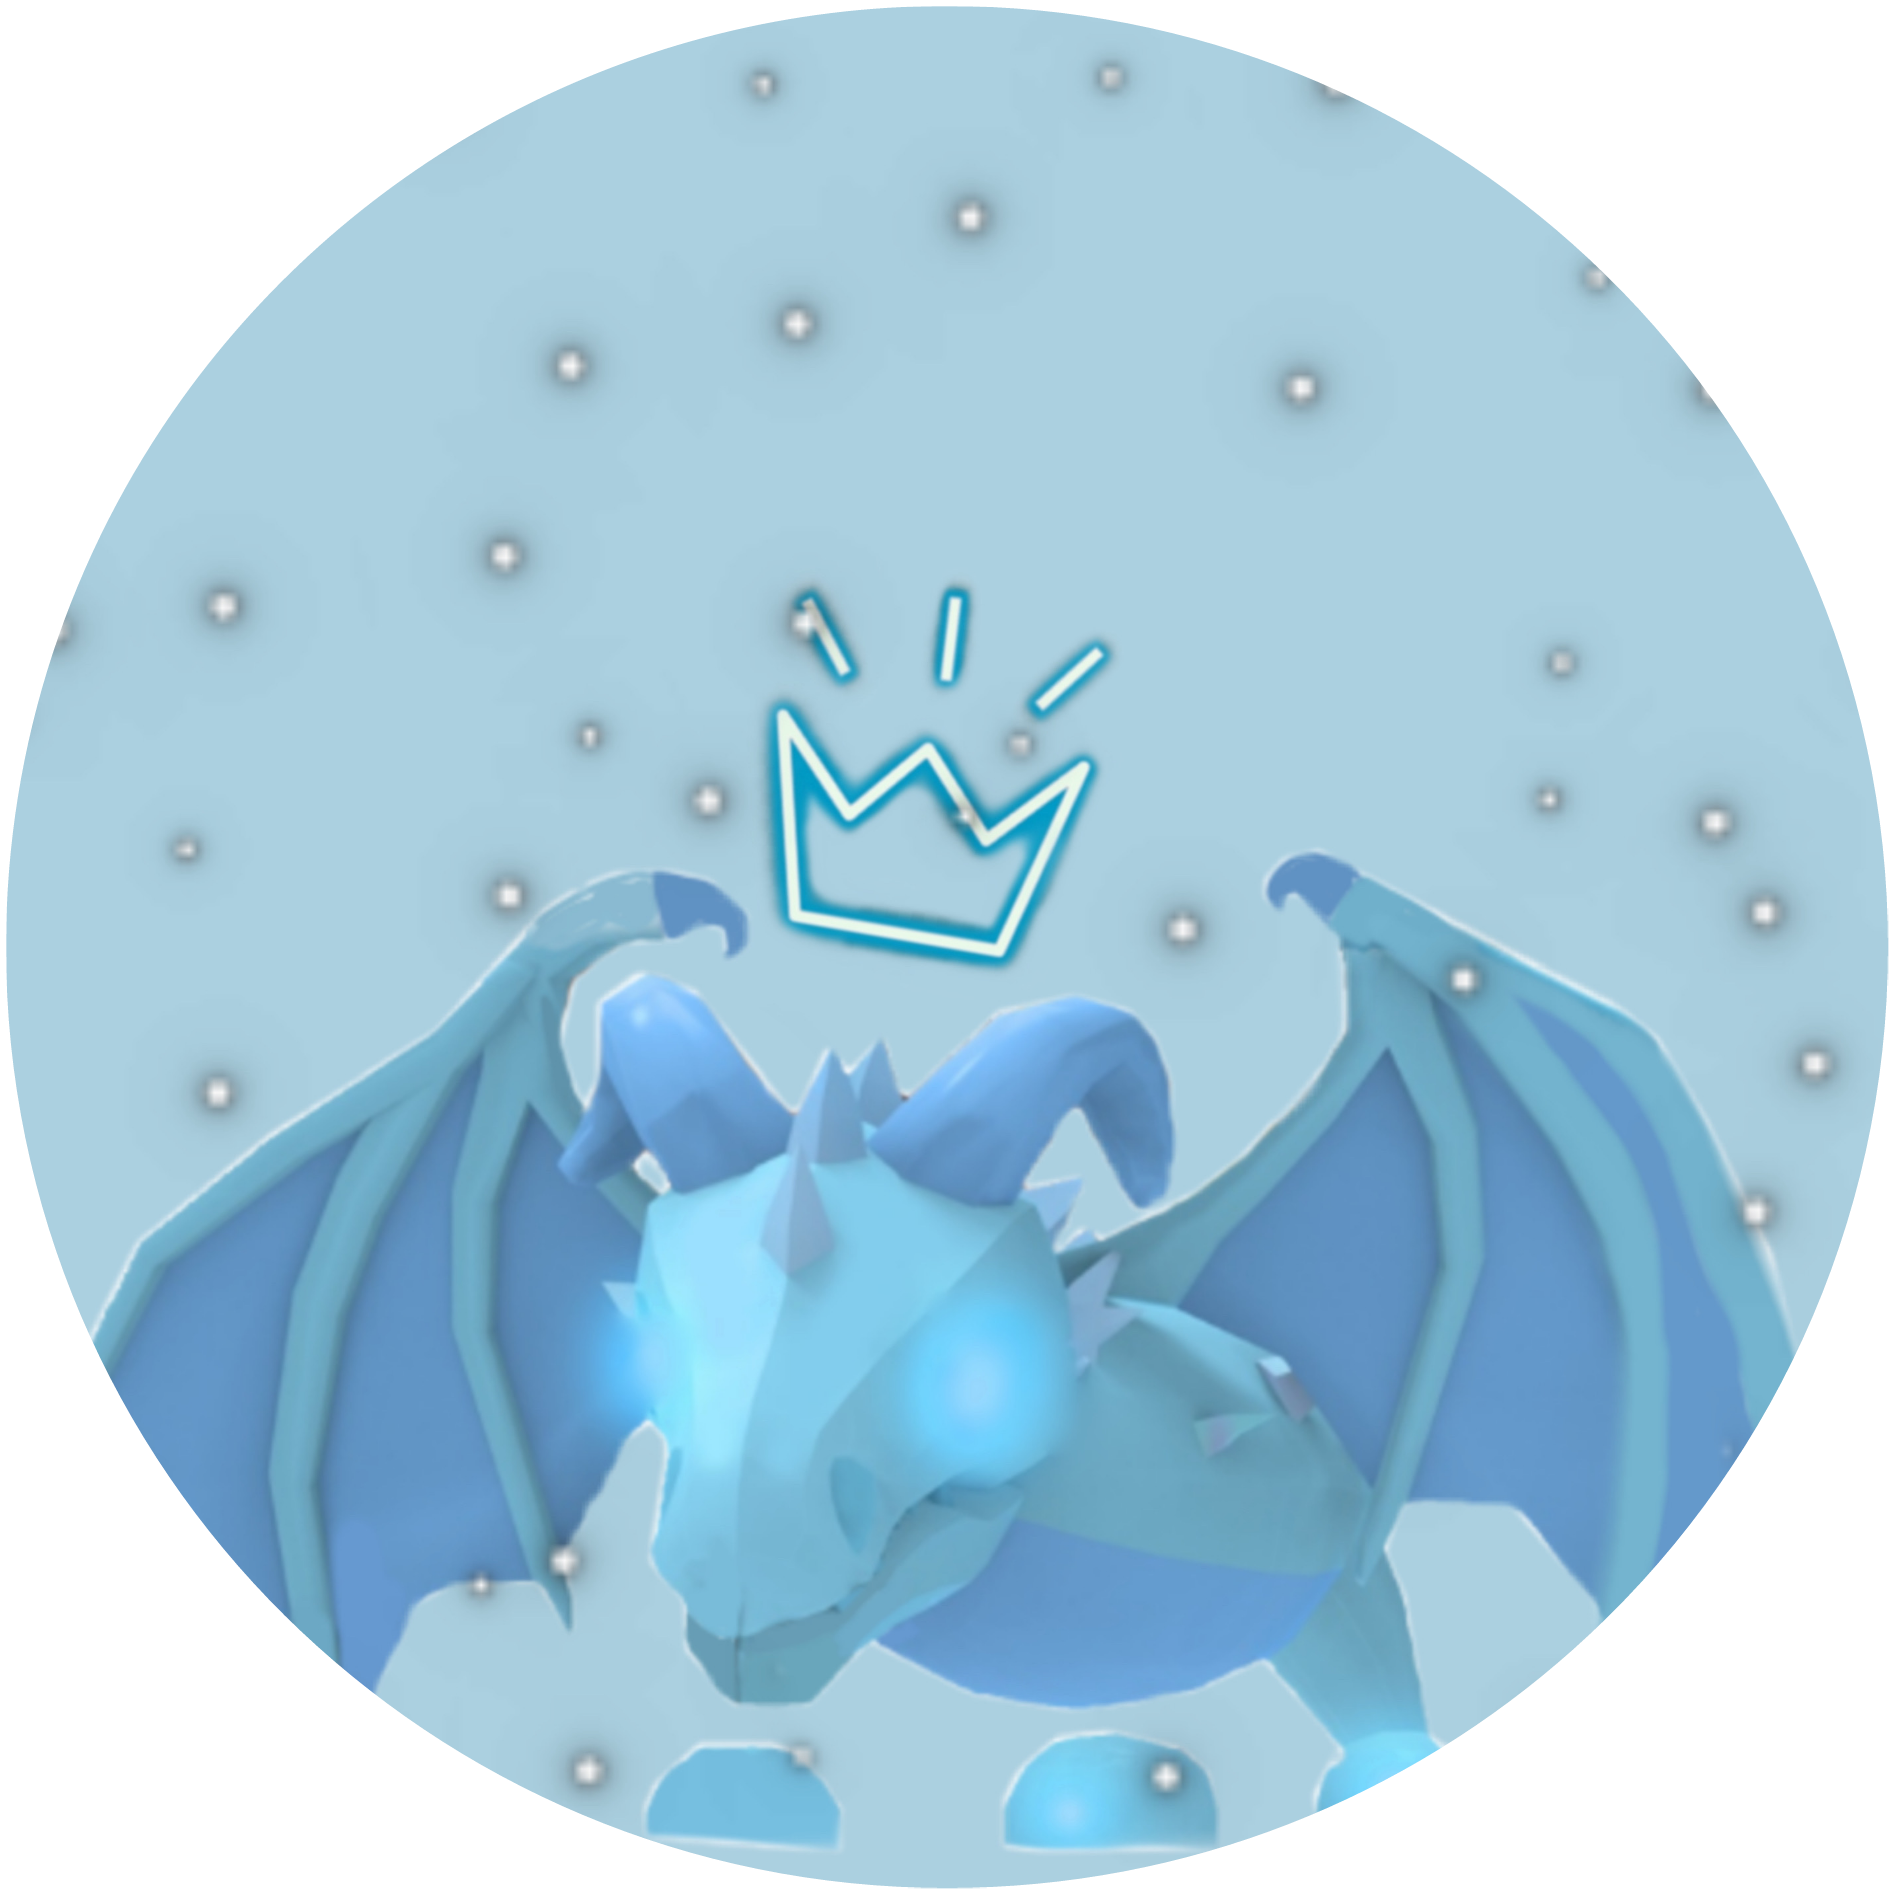 Adopt Me Frost Dragon Sticker By Vale - roblox adopt me frost dragon